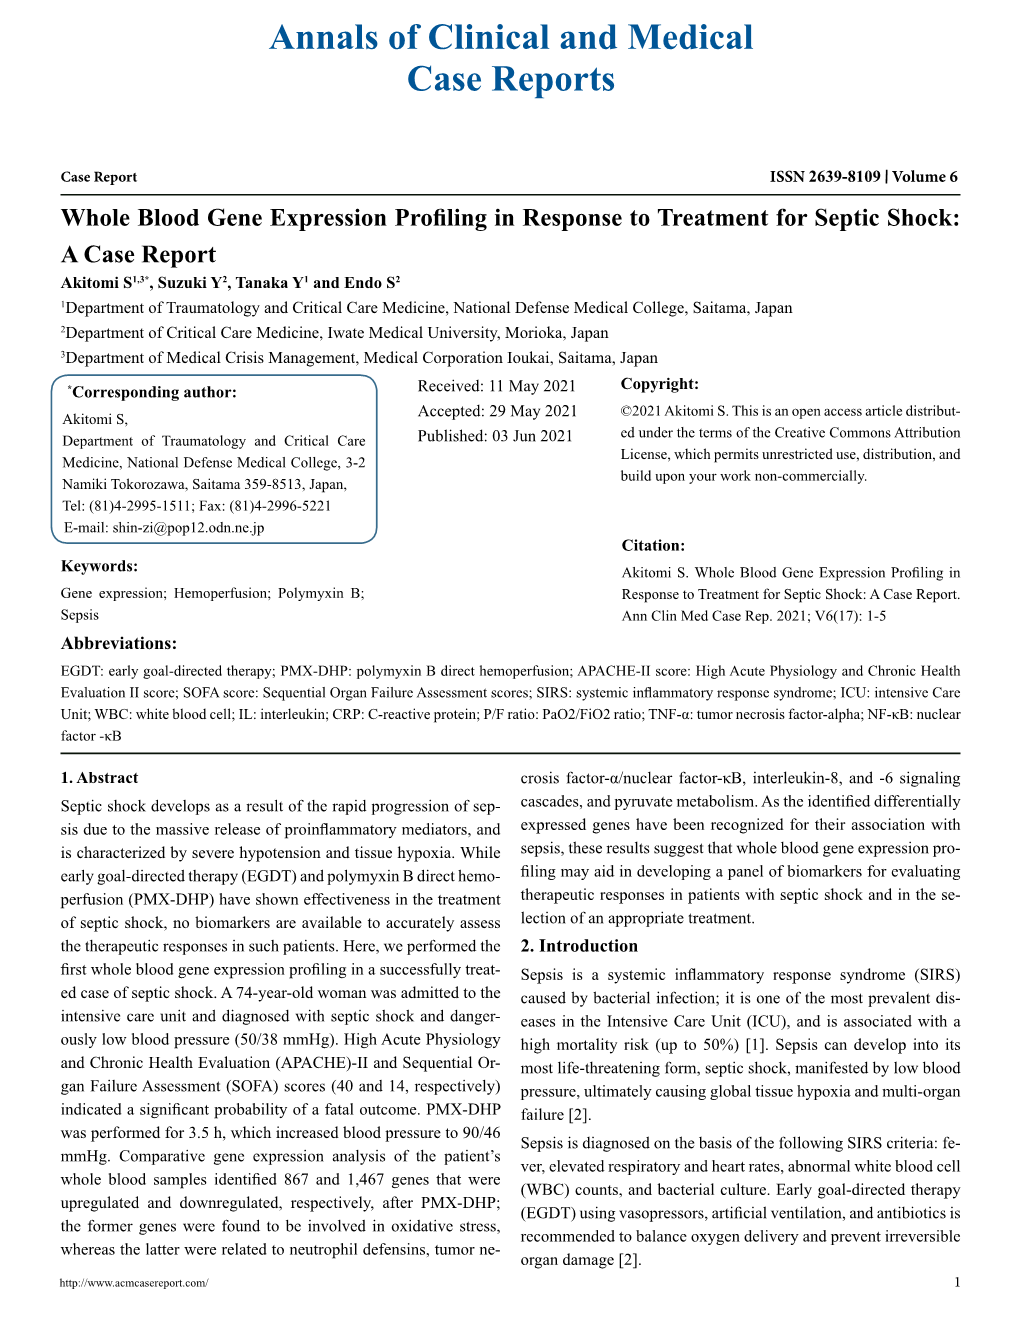 Whole Blood Gene Expression Profiling in Response to Treatment